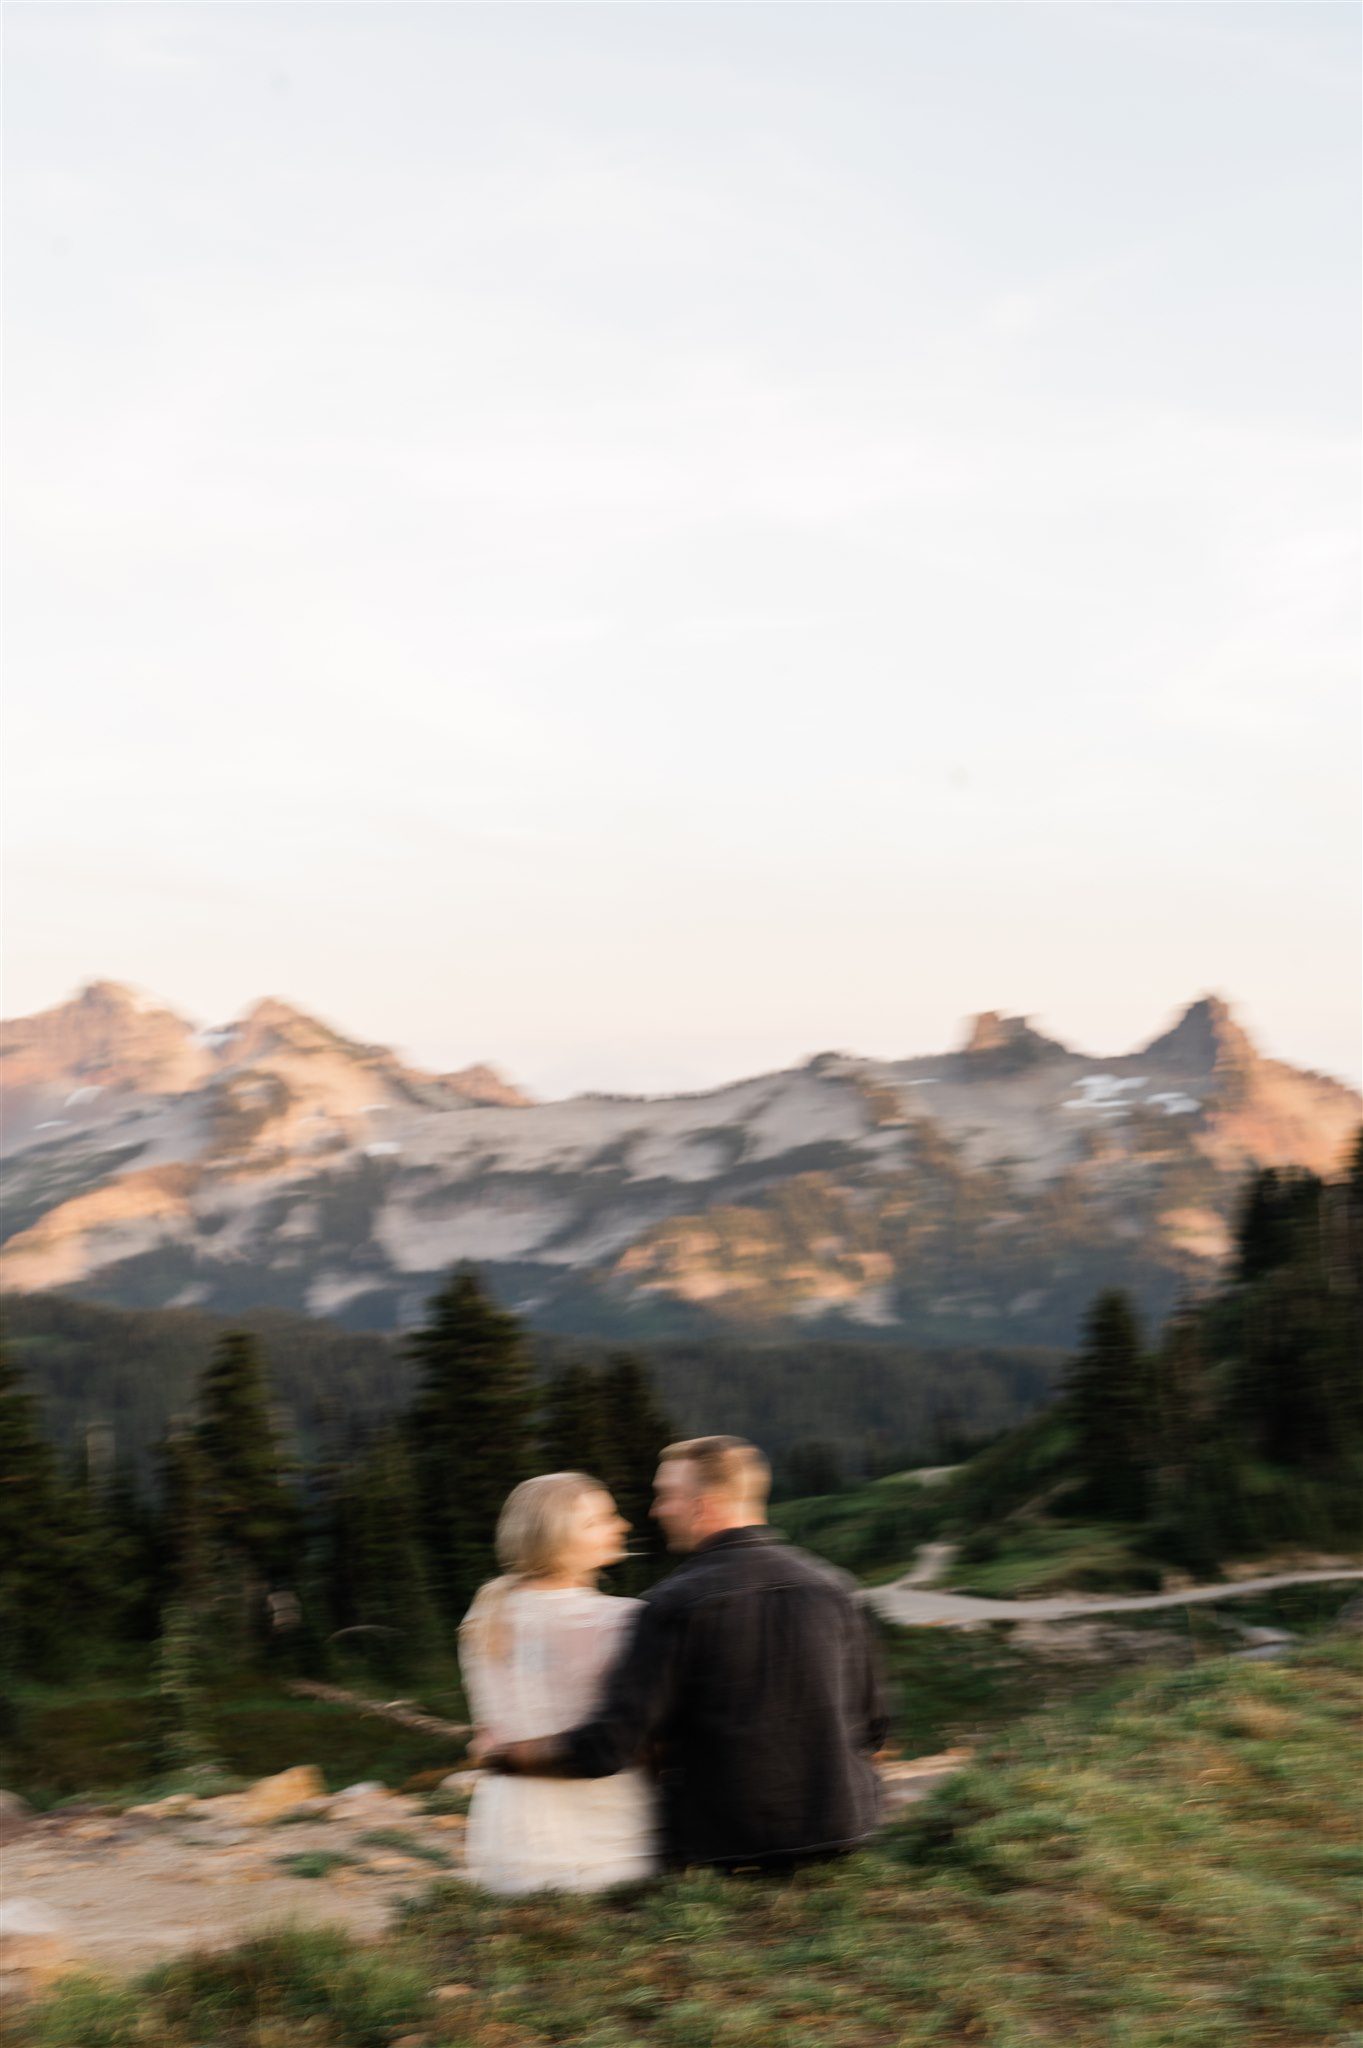 Blurred photo of couple sitting with mountains and trees in the background at sunset